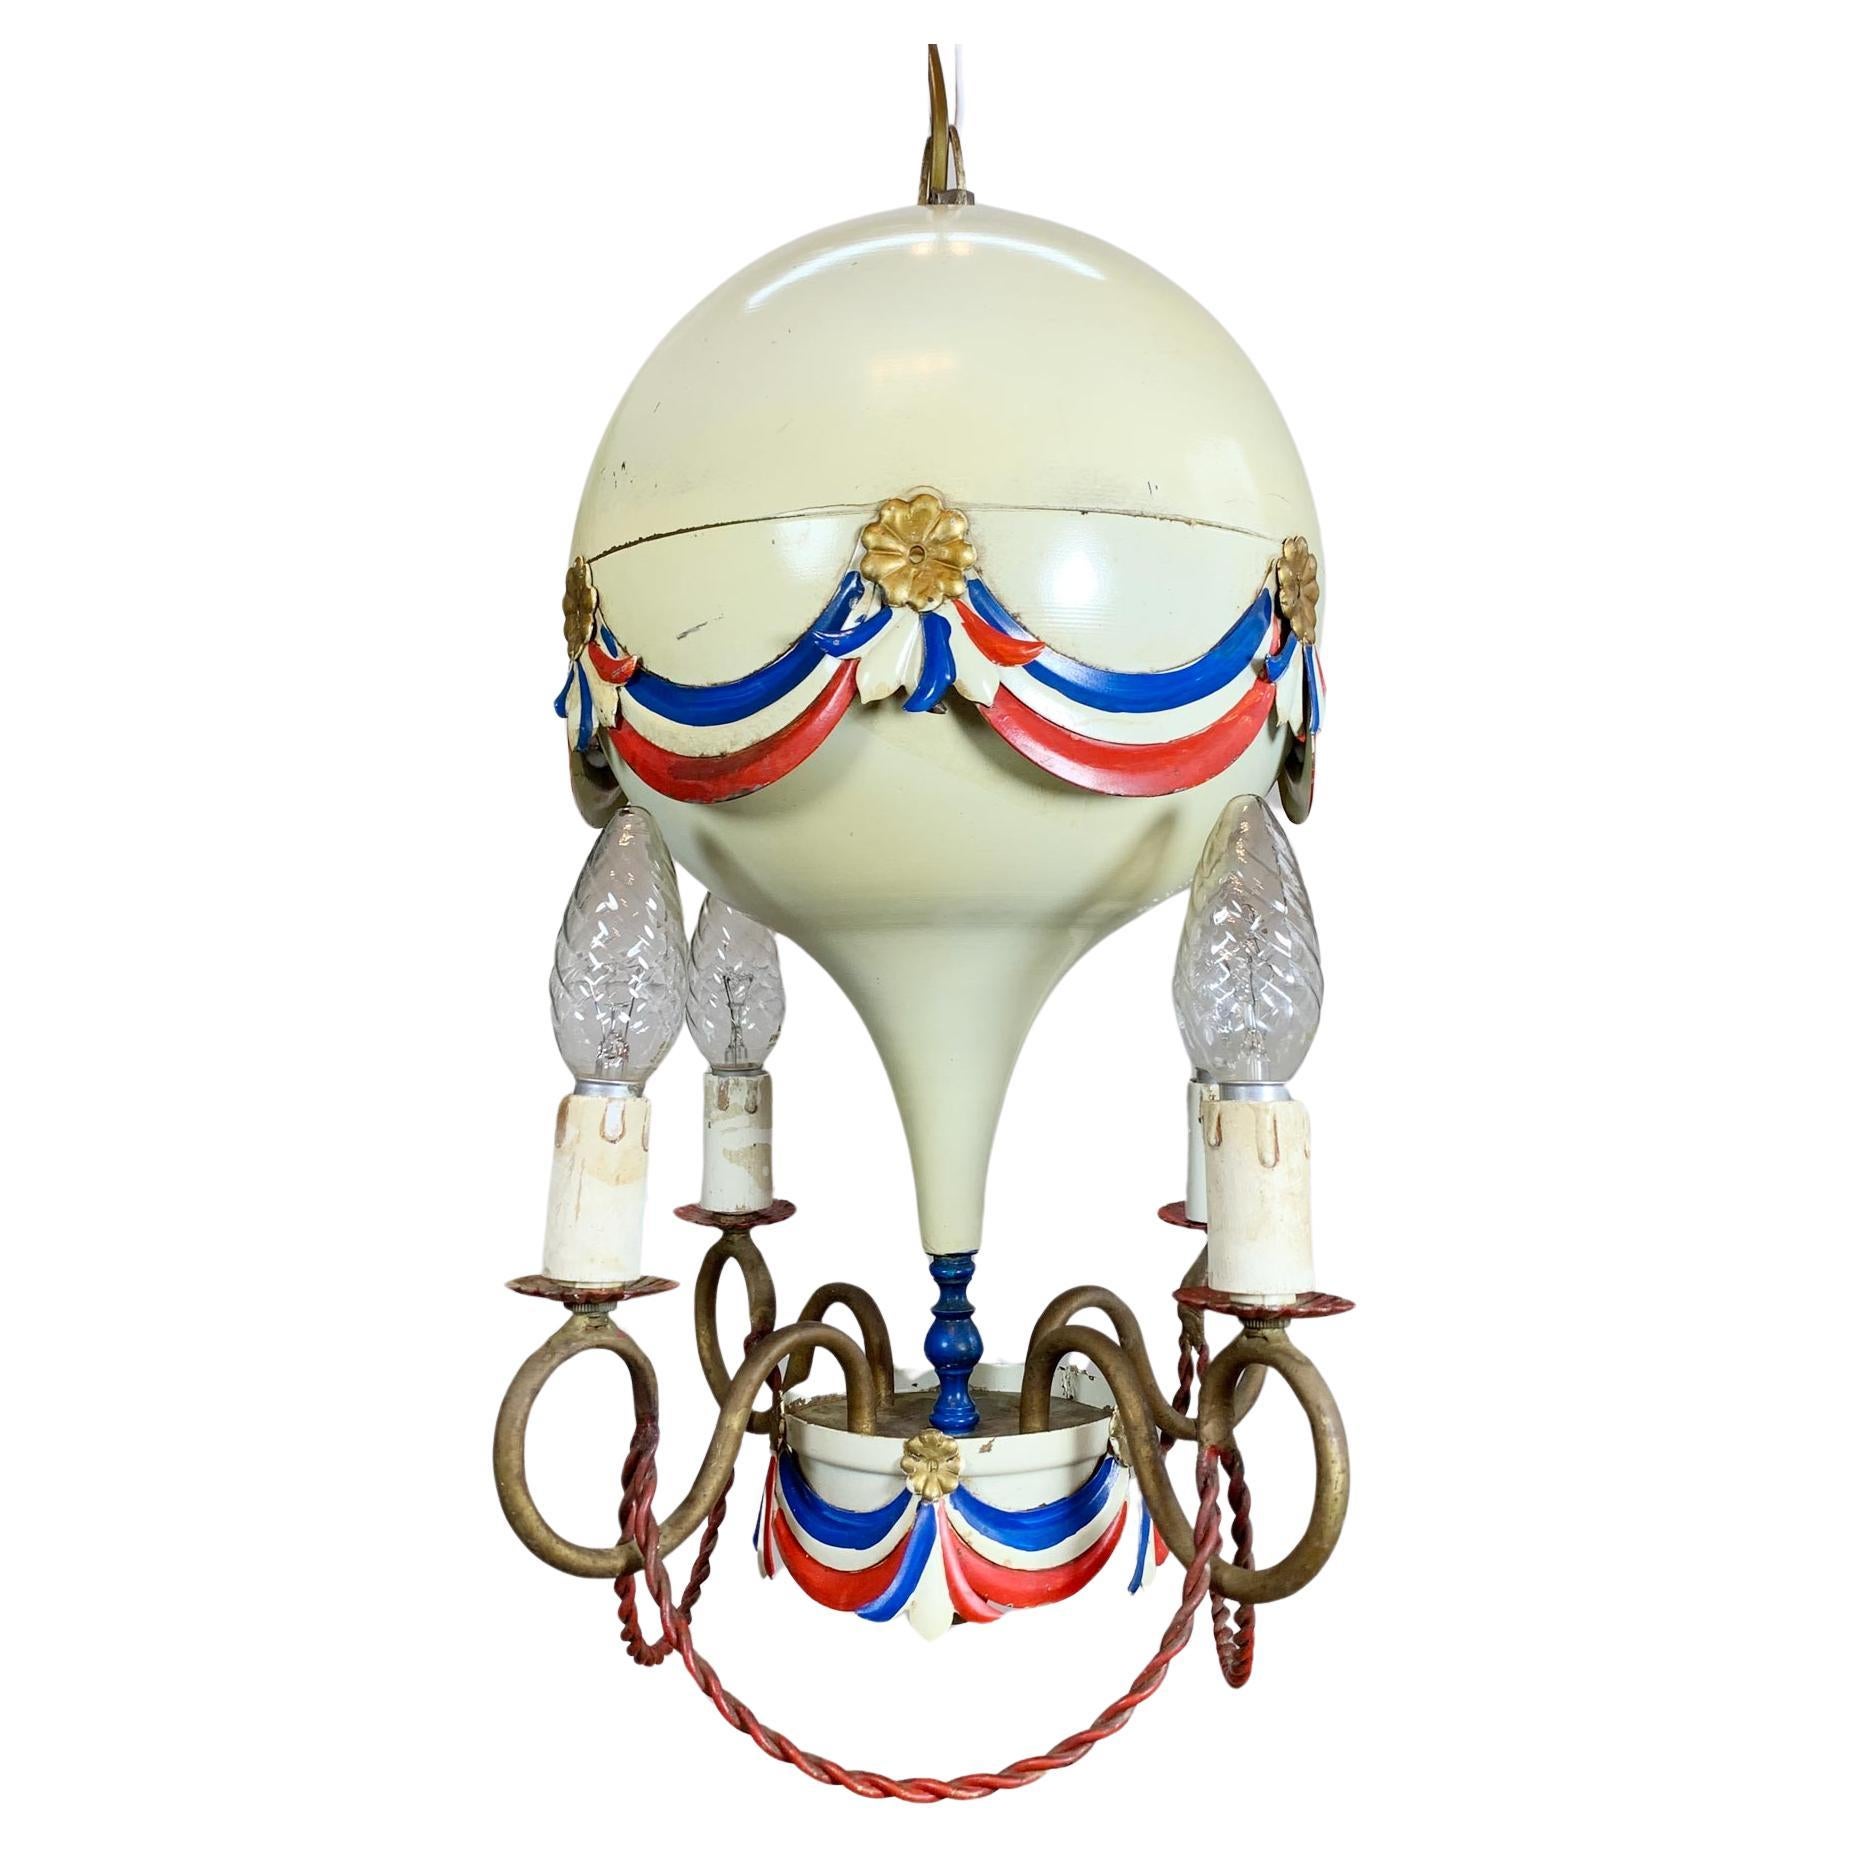 1950’s White Toleware Hot Air Balloon Chandelier For Sale